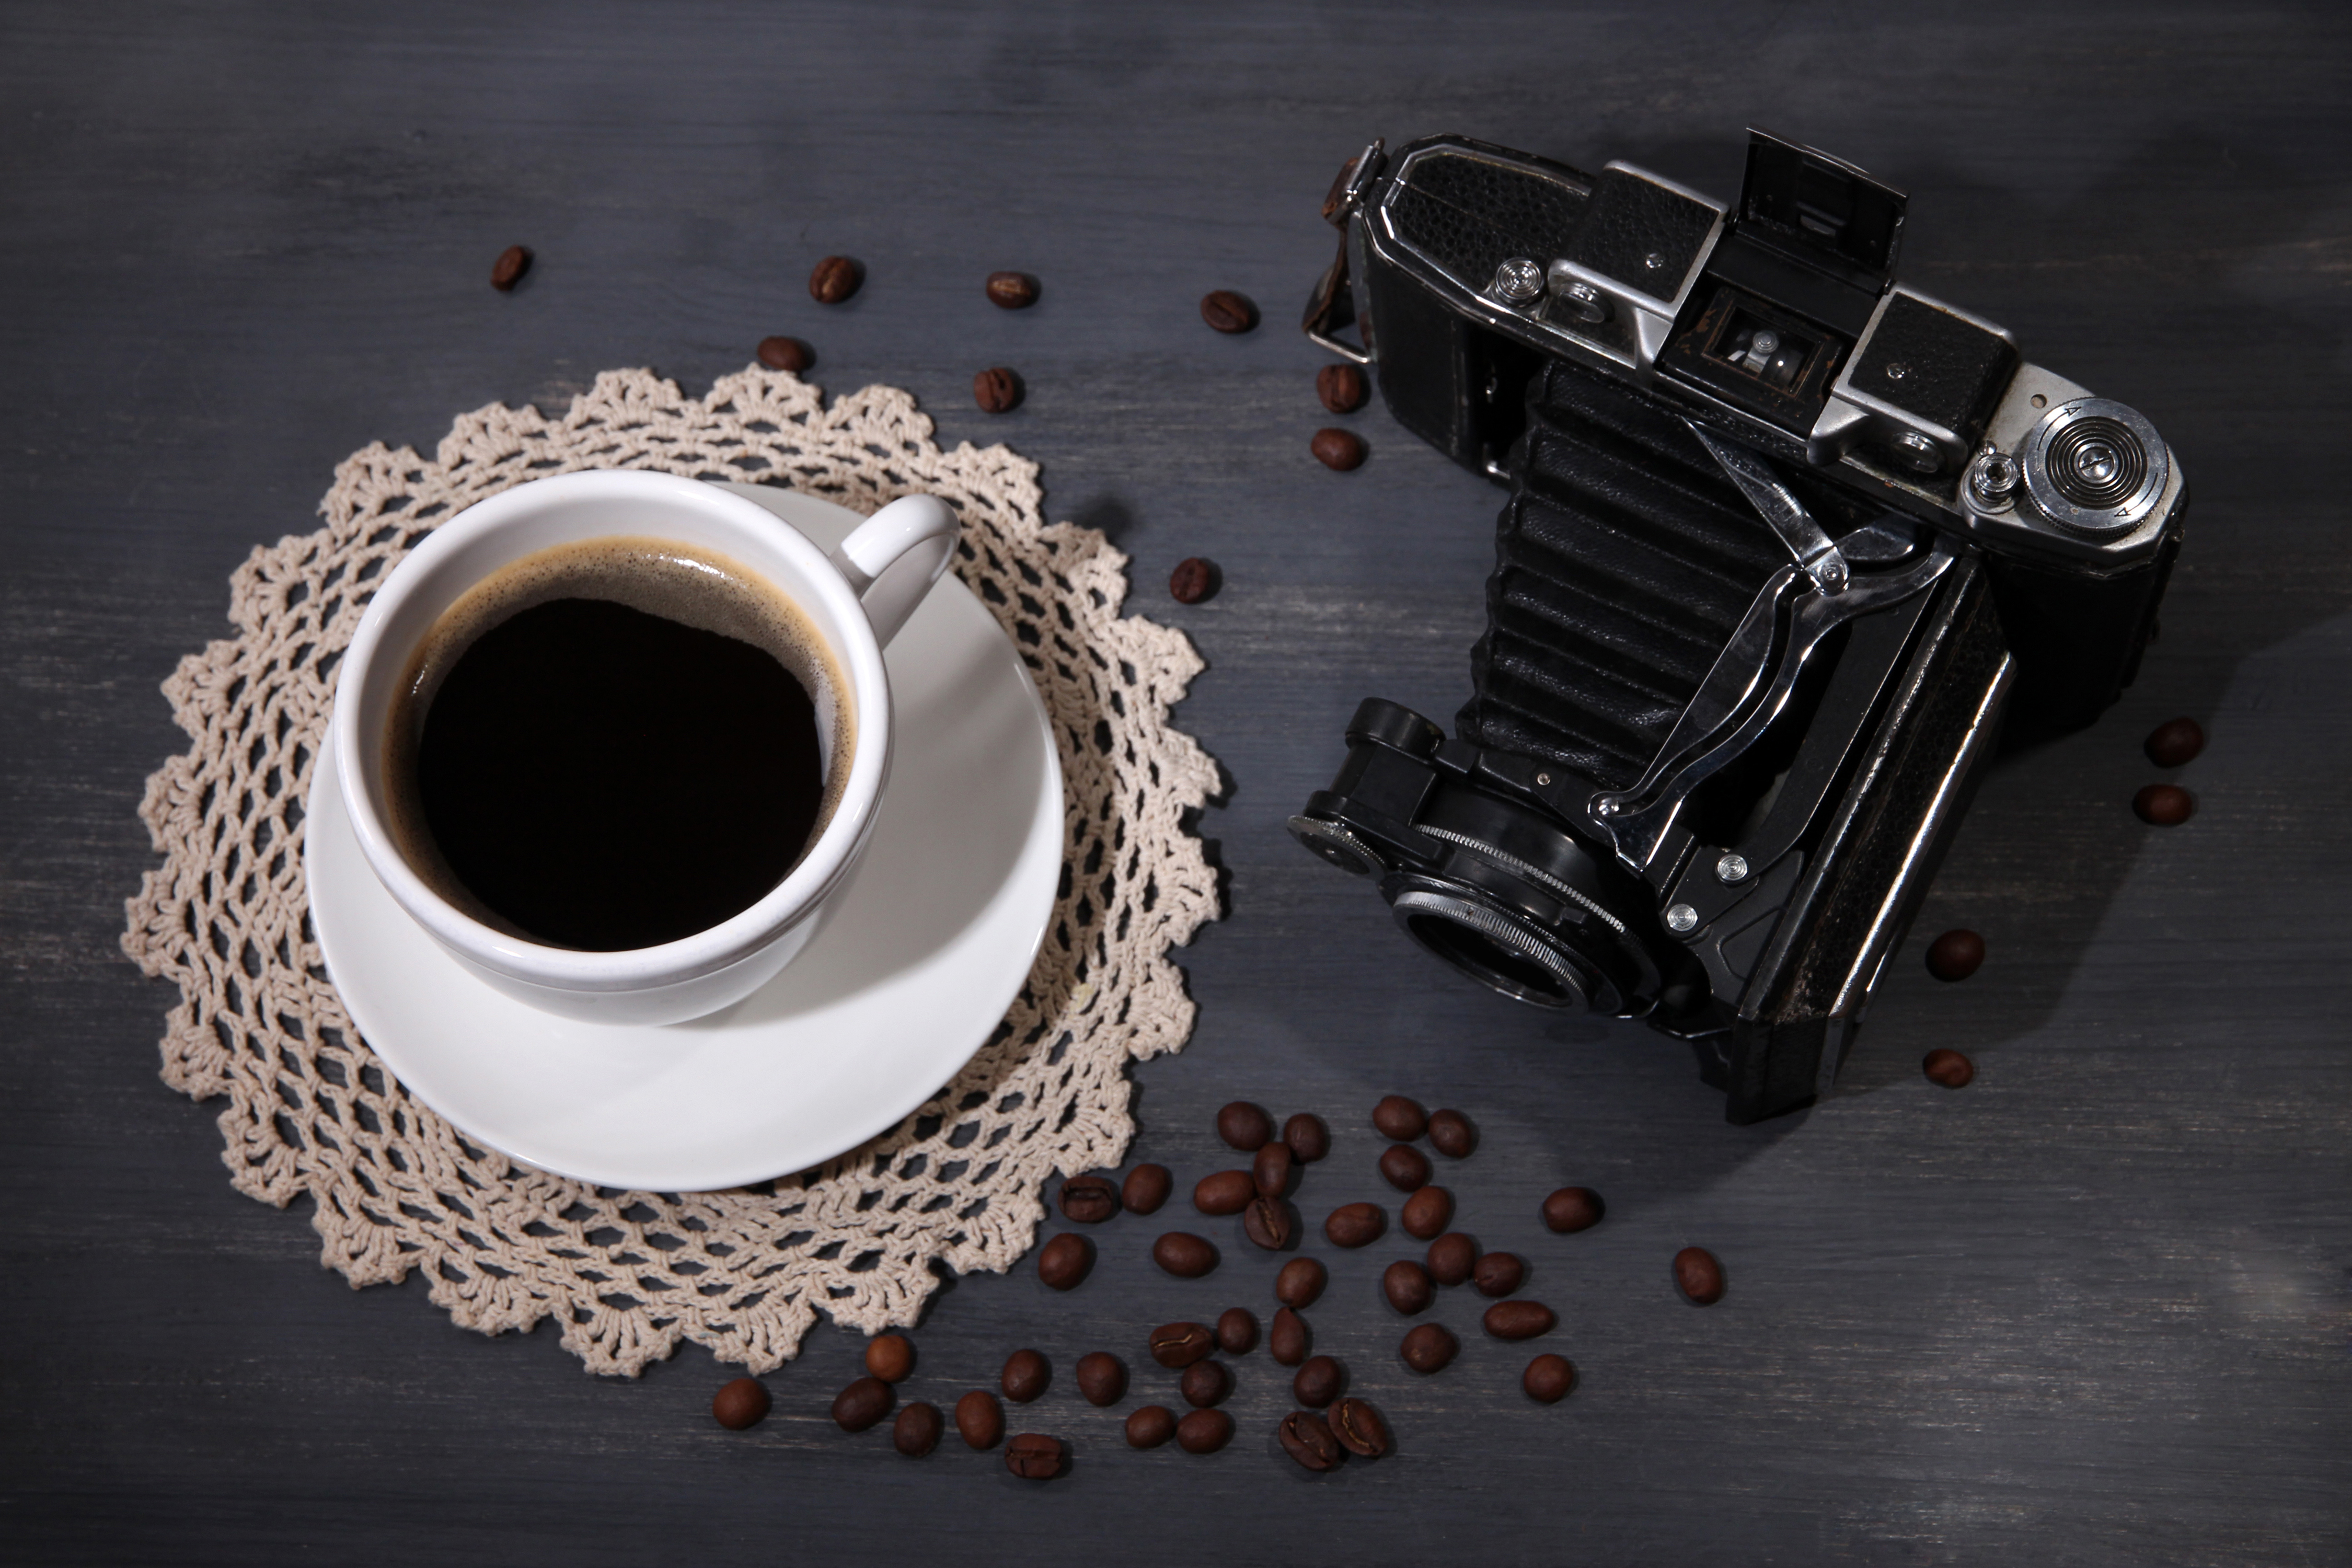 Camera Coffee Coffee Beans Cup Still Life Vintage Camera 4500x3000